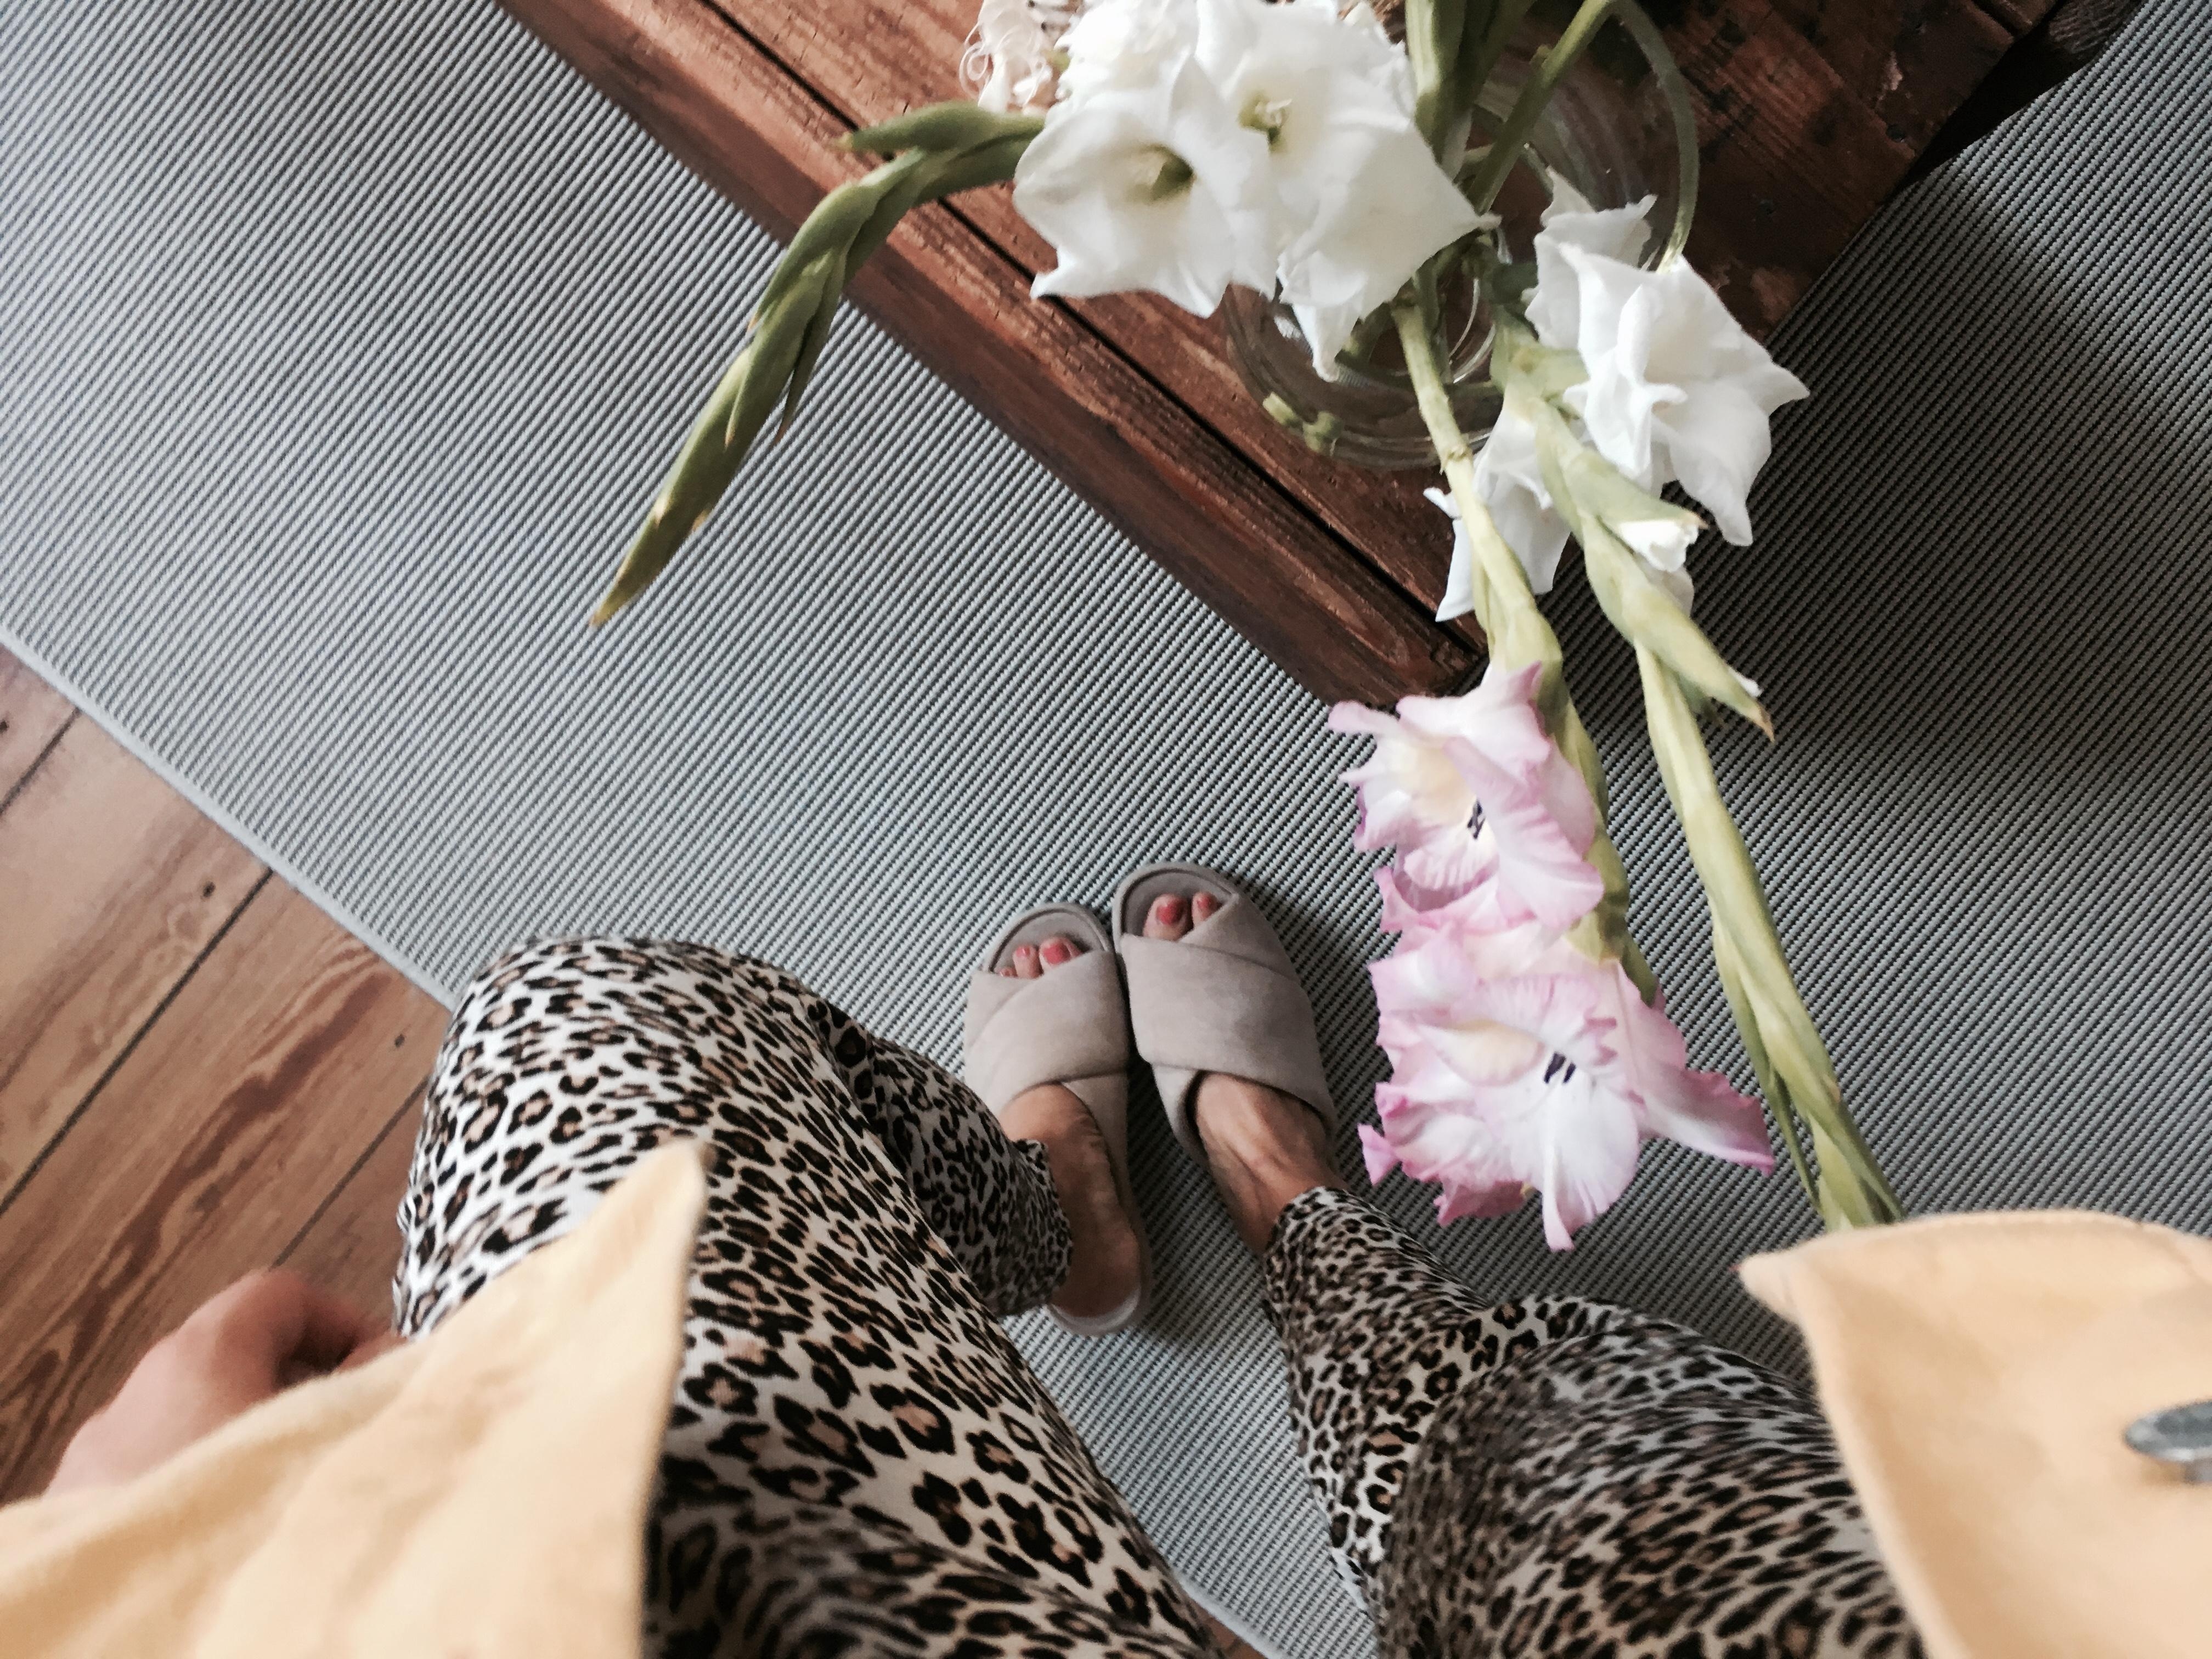 🐆🌸
#flowers #leoprint #couchstyle #raw